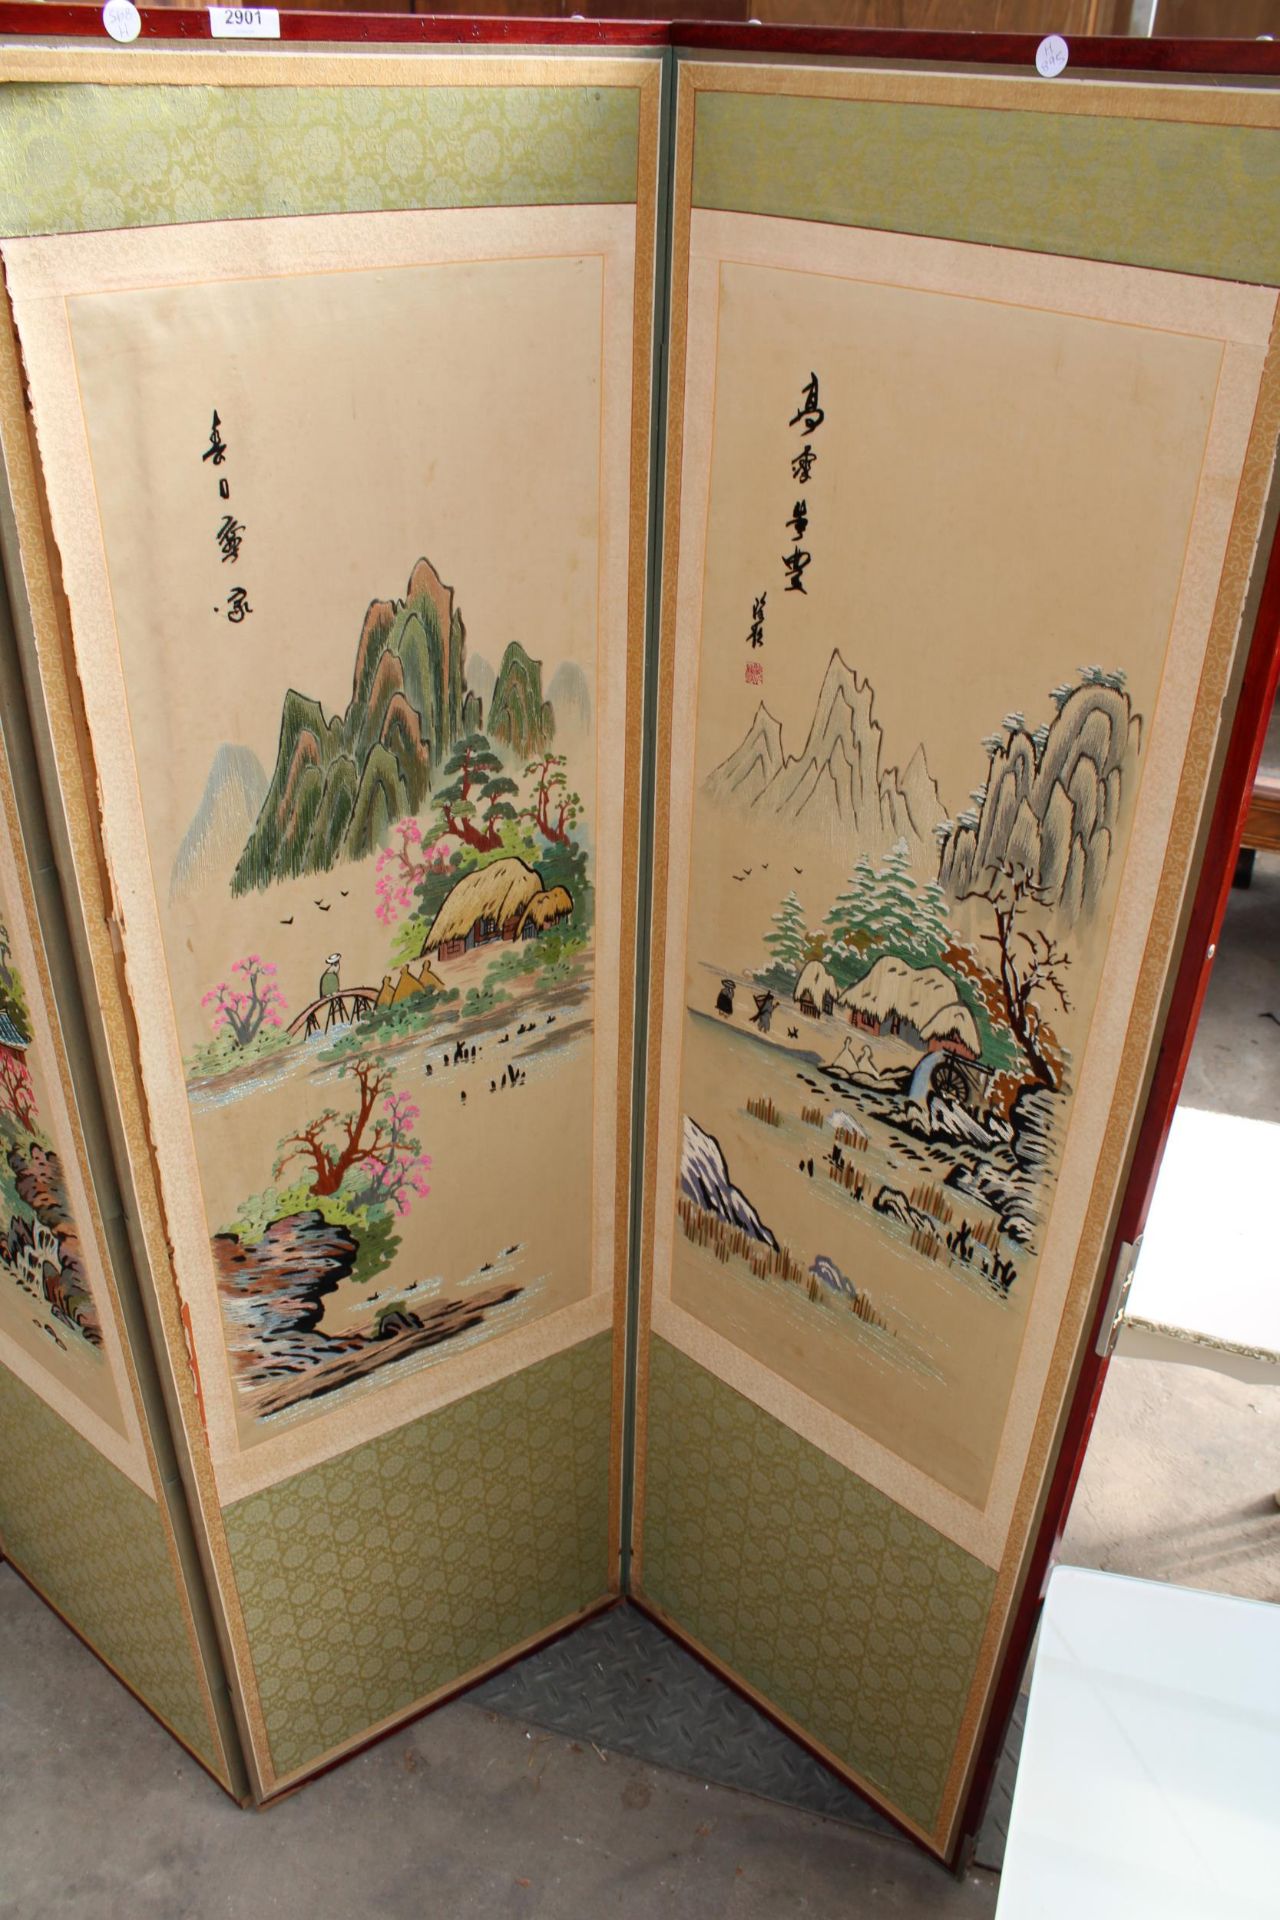 AN ORIENTAL SIX DIVISION SCREEN WITH TAPESTRY AND SILK MOUNTAIN SCENES EACH SECTION IS 60" X 18" - Image 4 of 8